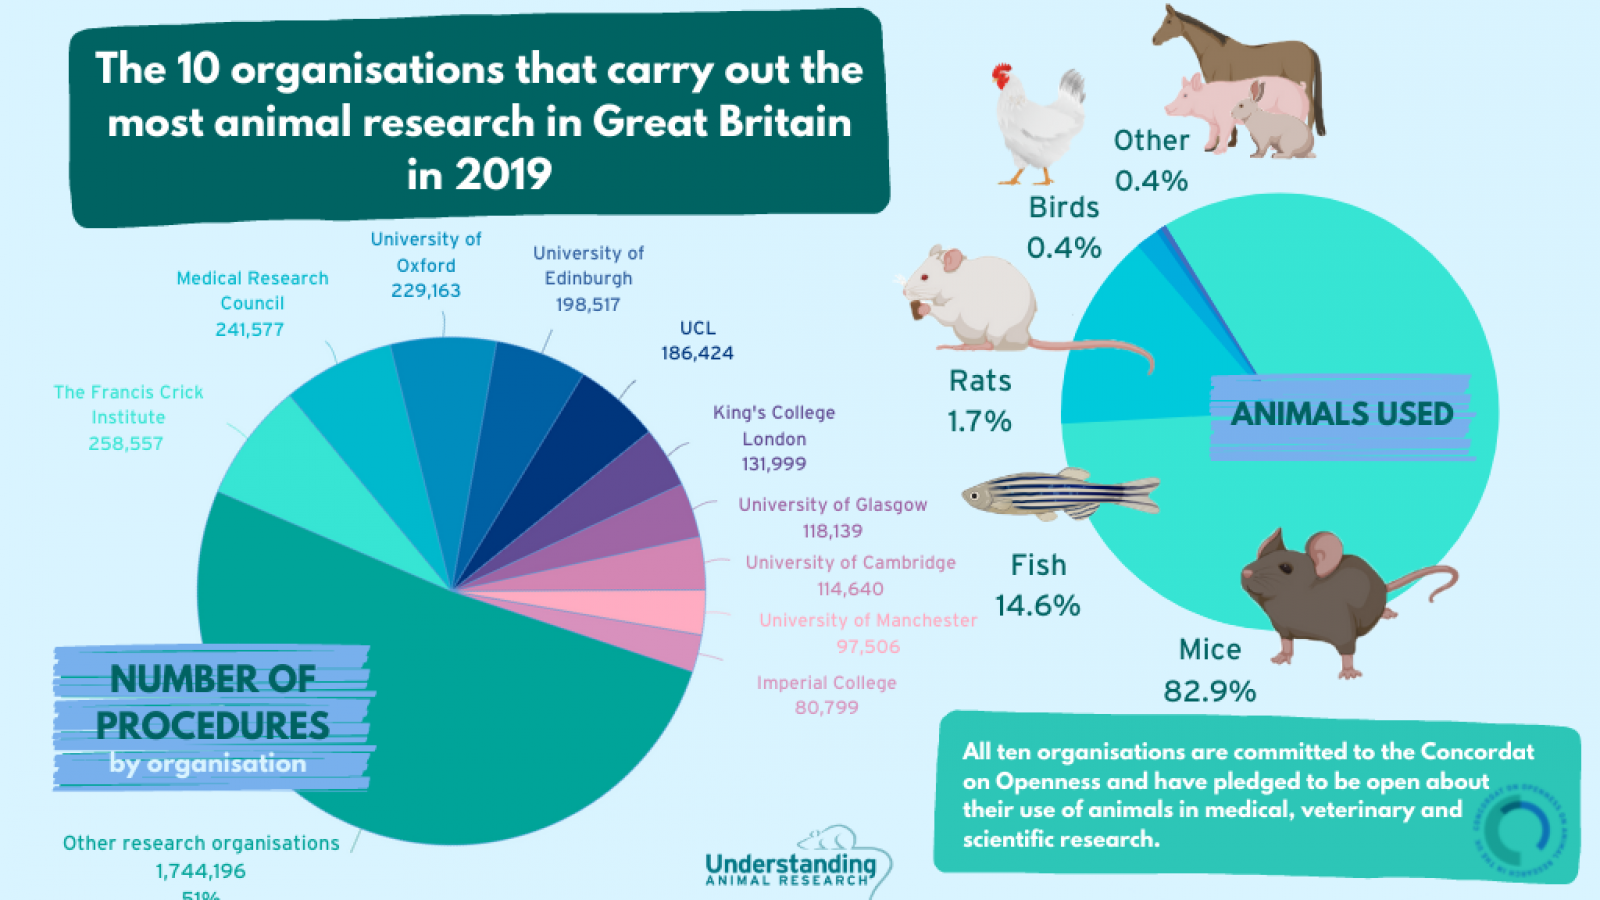 Ten organisations account for half of all animal research in Great Britain in 2019